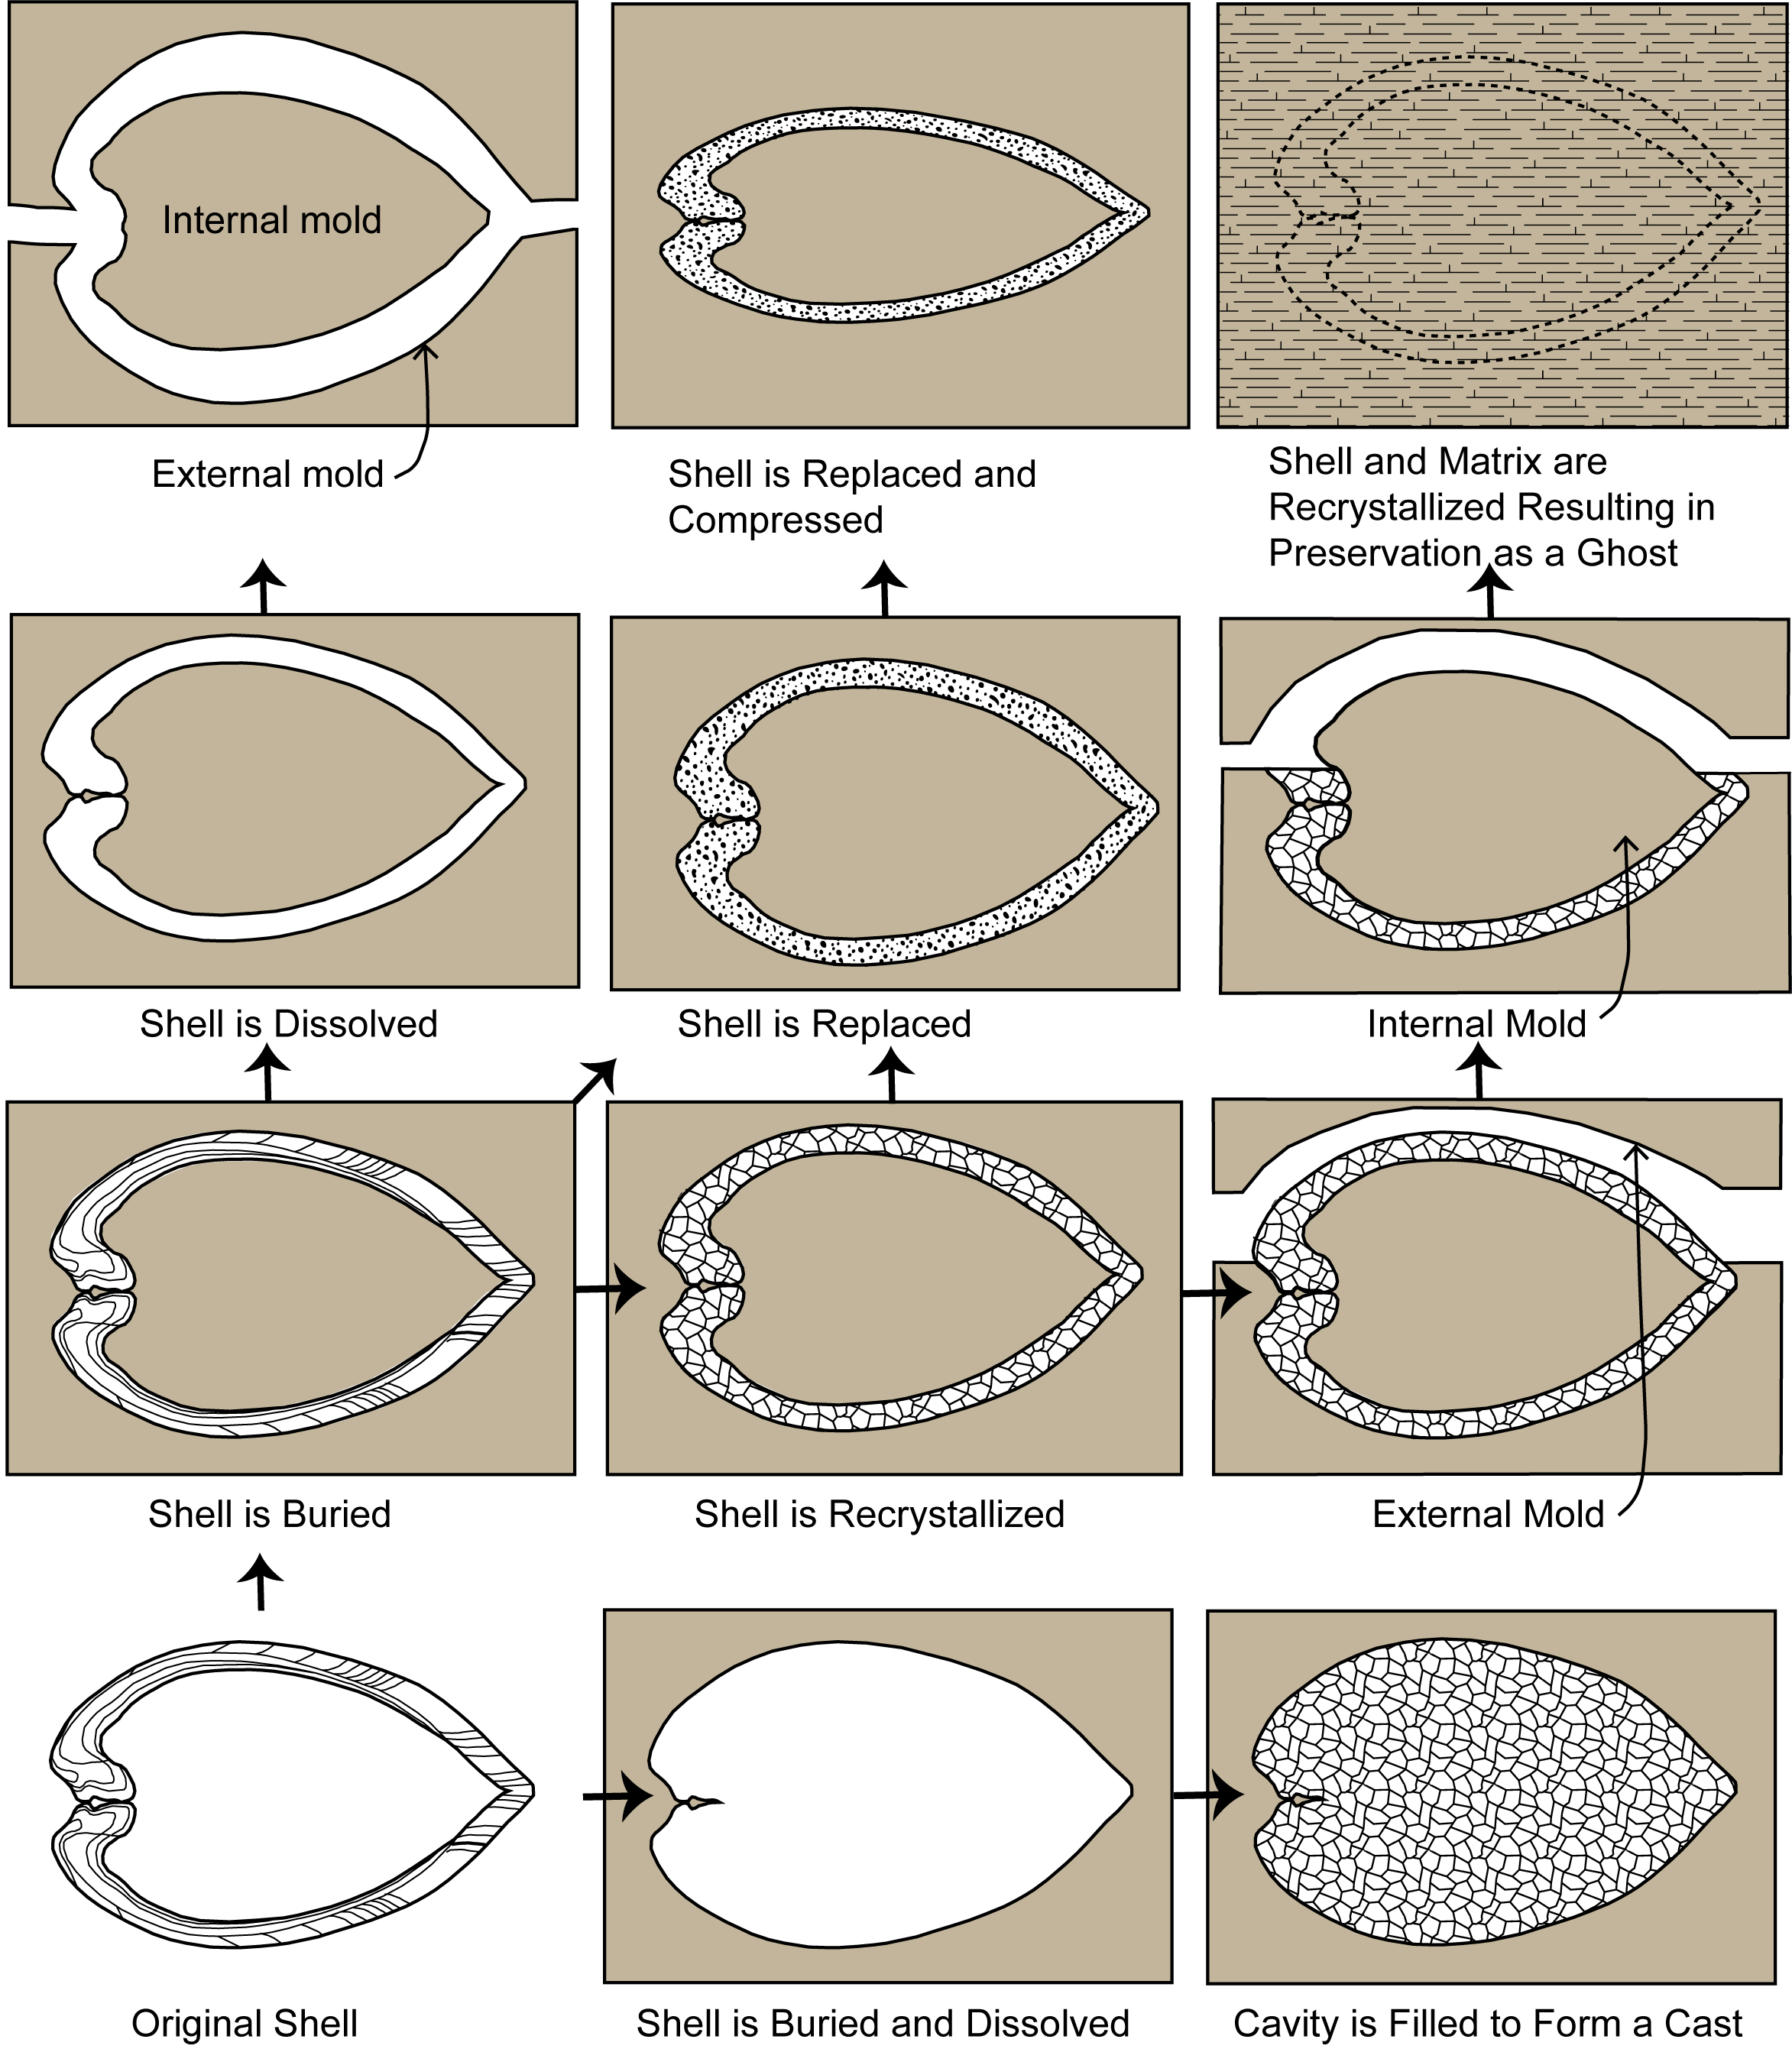 Types of fossilization including alteration, replacement that result in casts and molds.